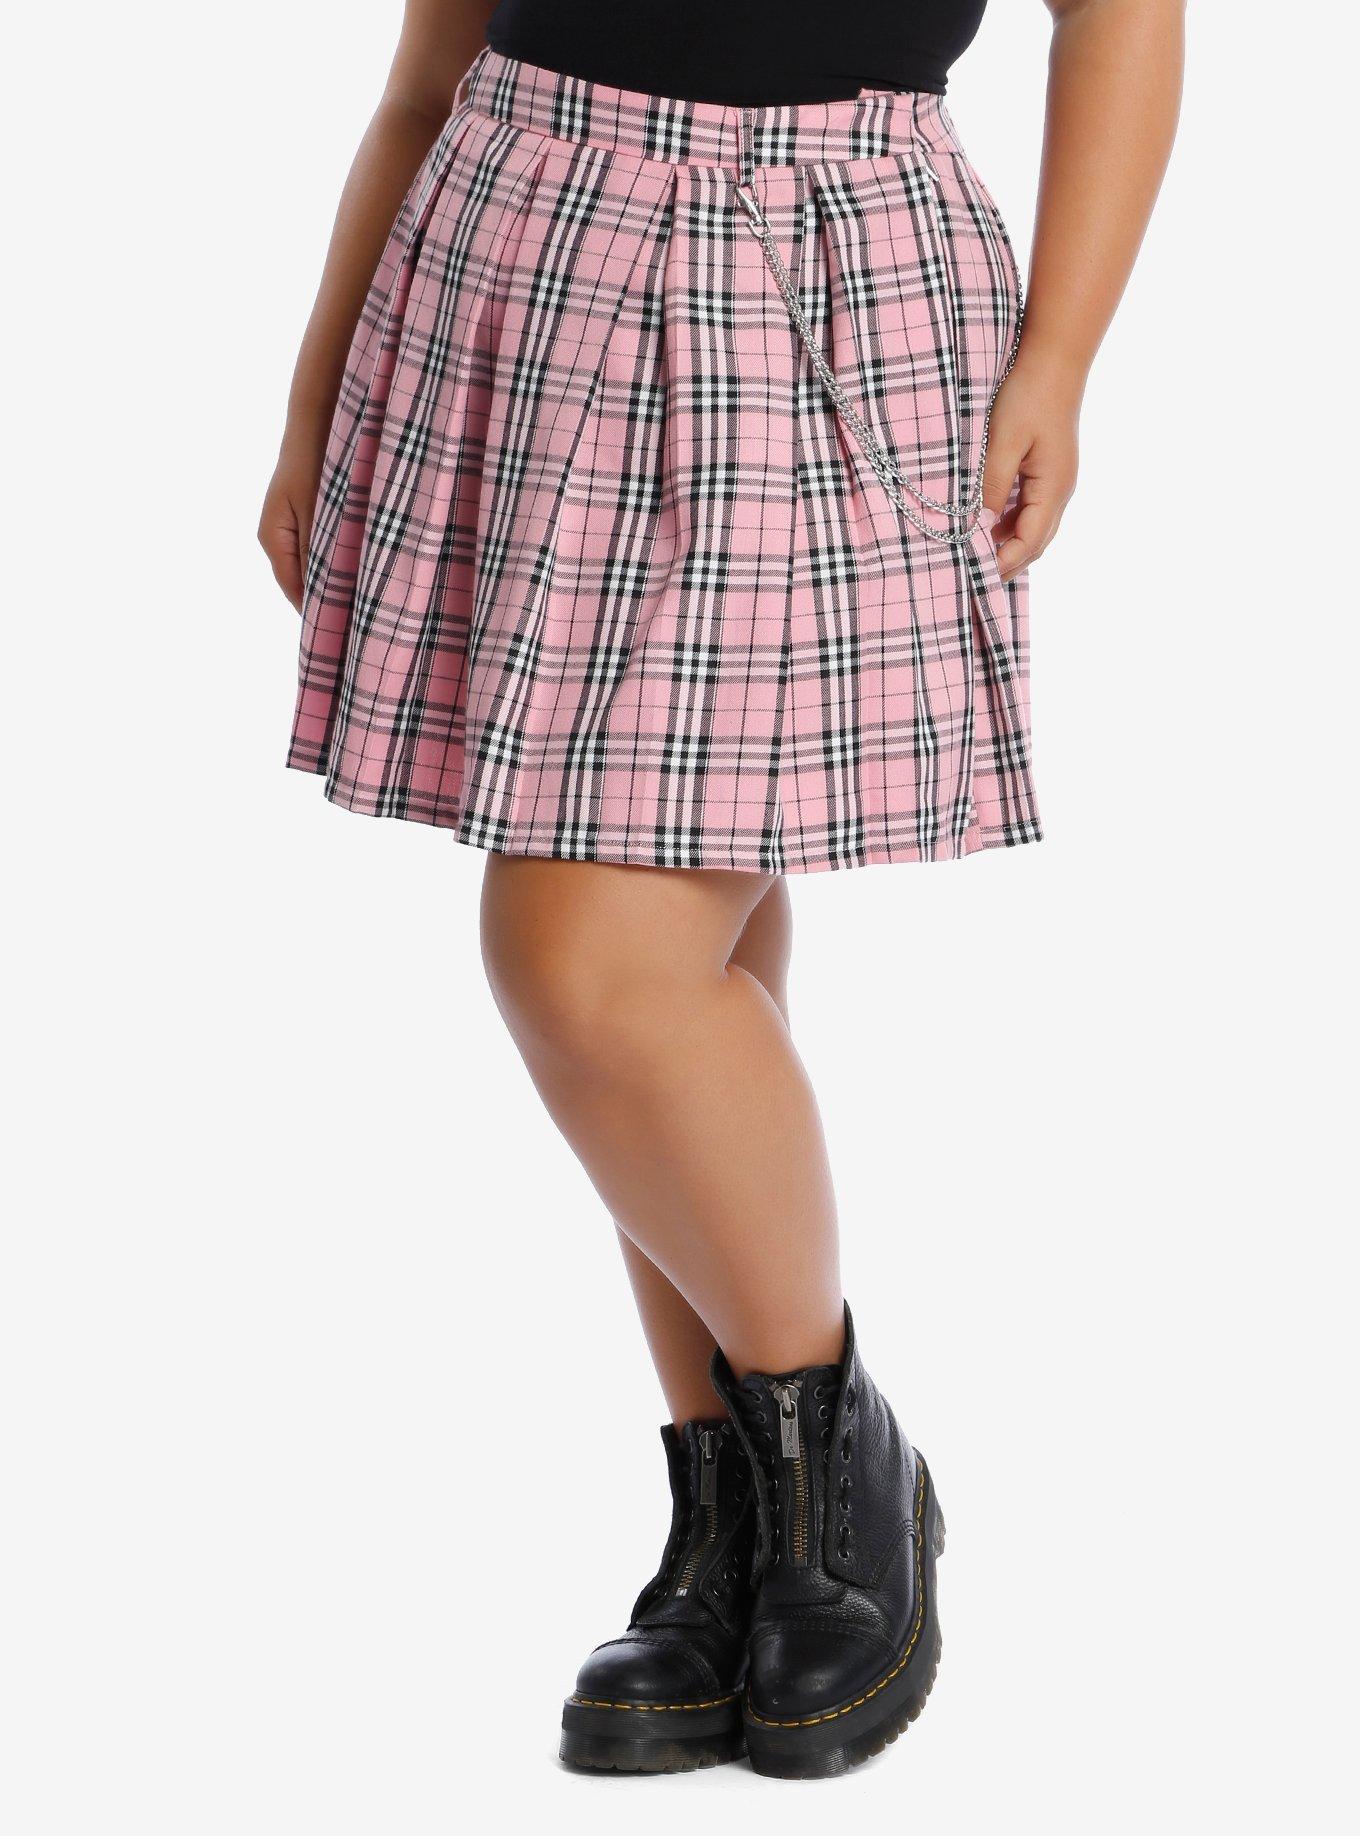 Pink Plaid Pleated Chain Skirt Plus Size, PLAID - PINK, hi-res